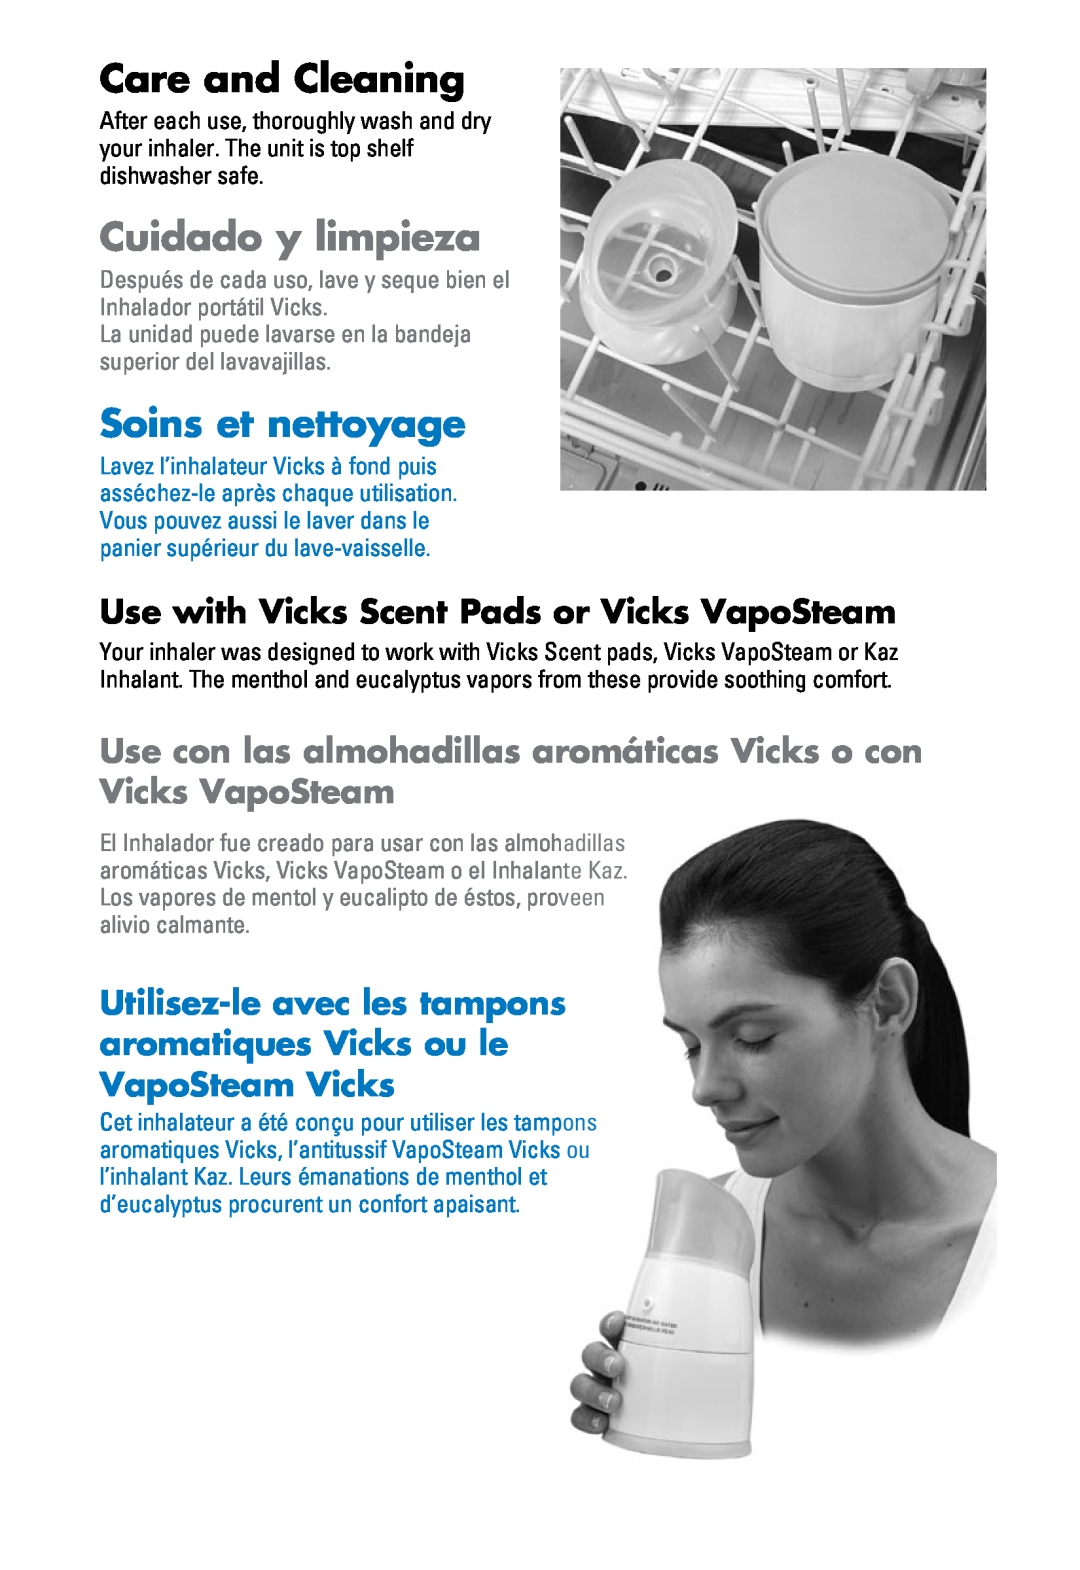 Kaz v1300 Care and Cleaning, Cuidado y limpieza, Soins et nettoyage, Use with Vicks Scent Pads or Vicks VapoSteam 